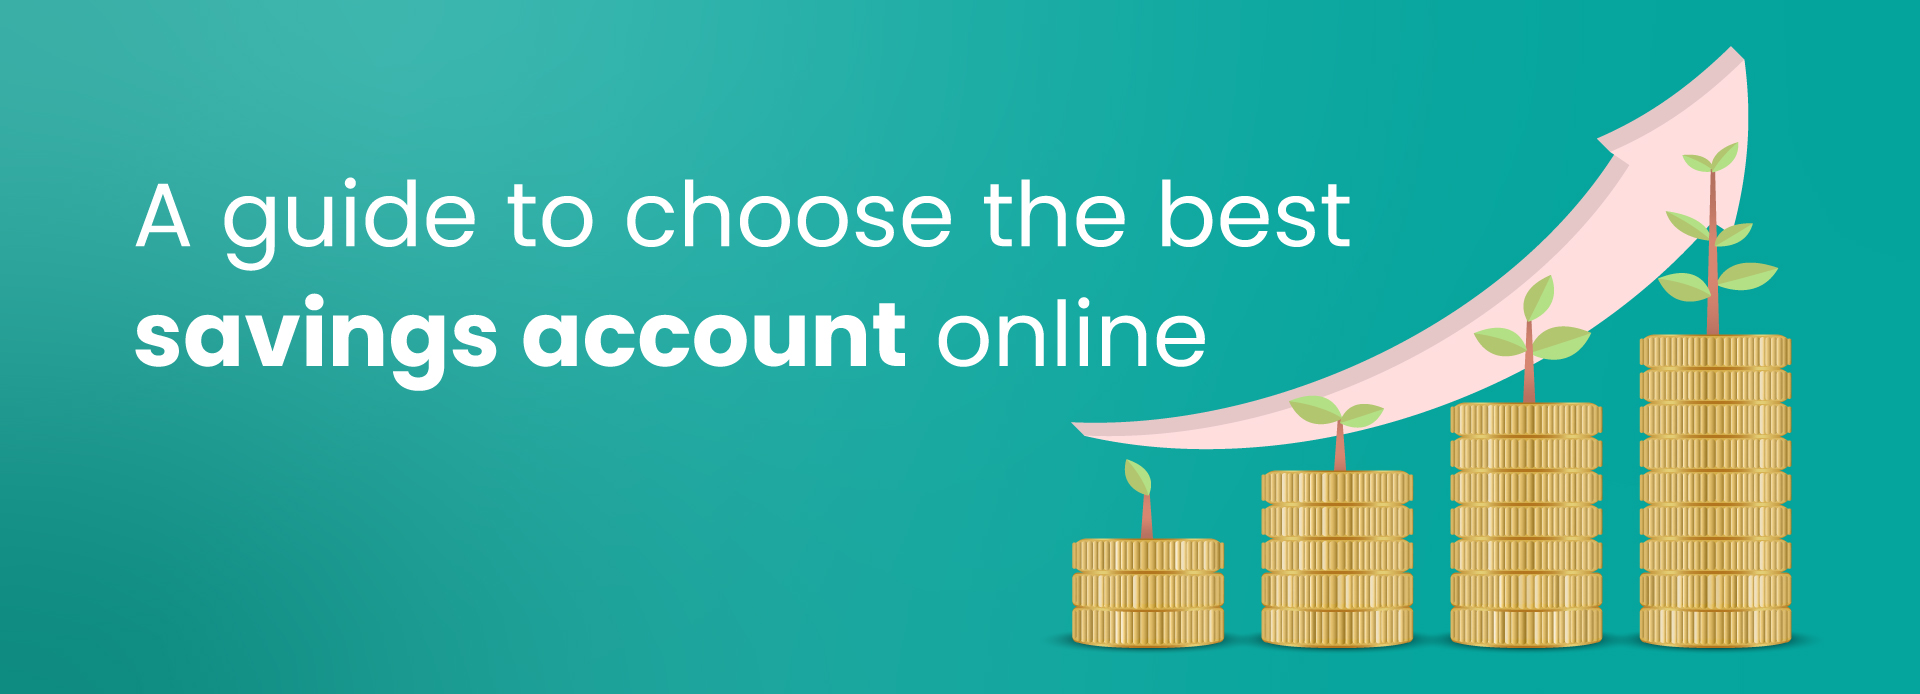 A Guide to Choosing the Best Savings Account Online 